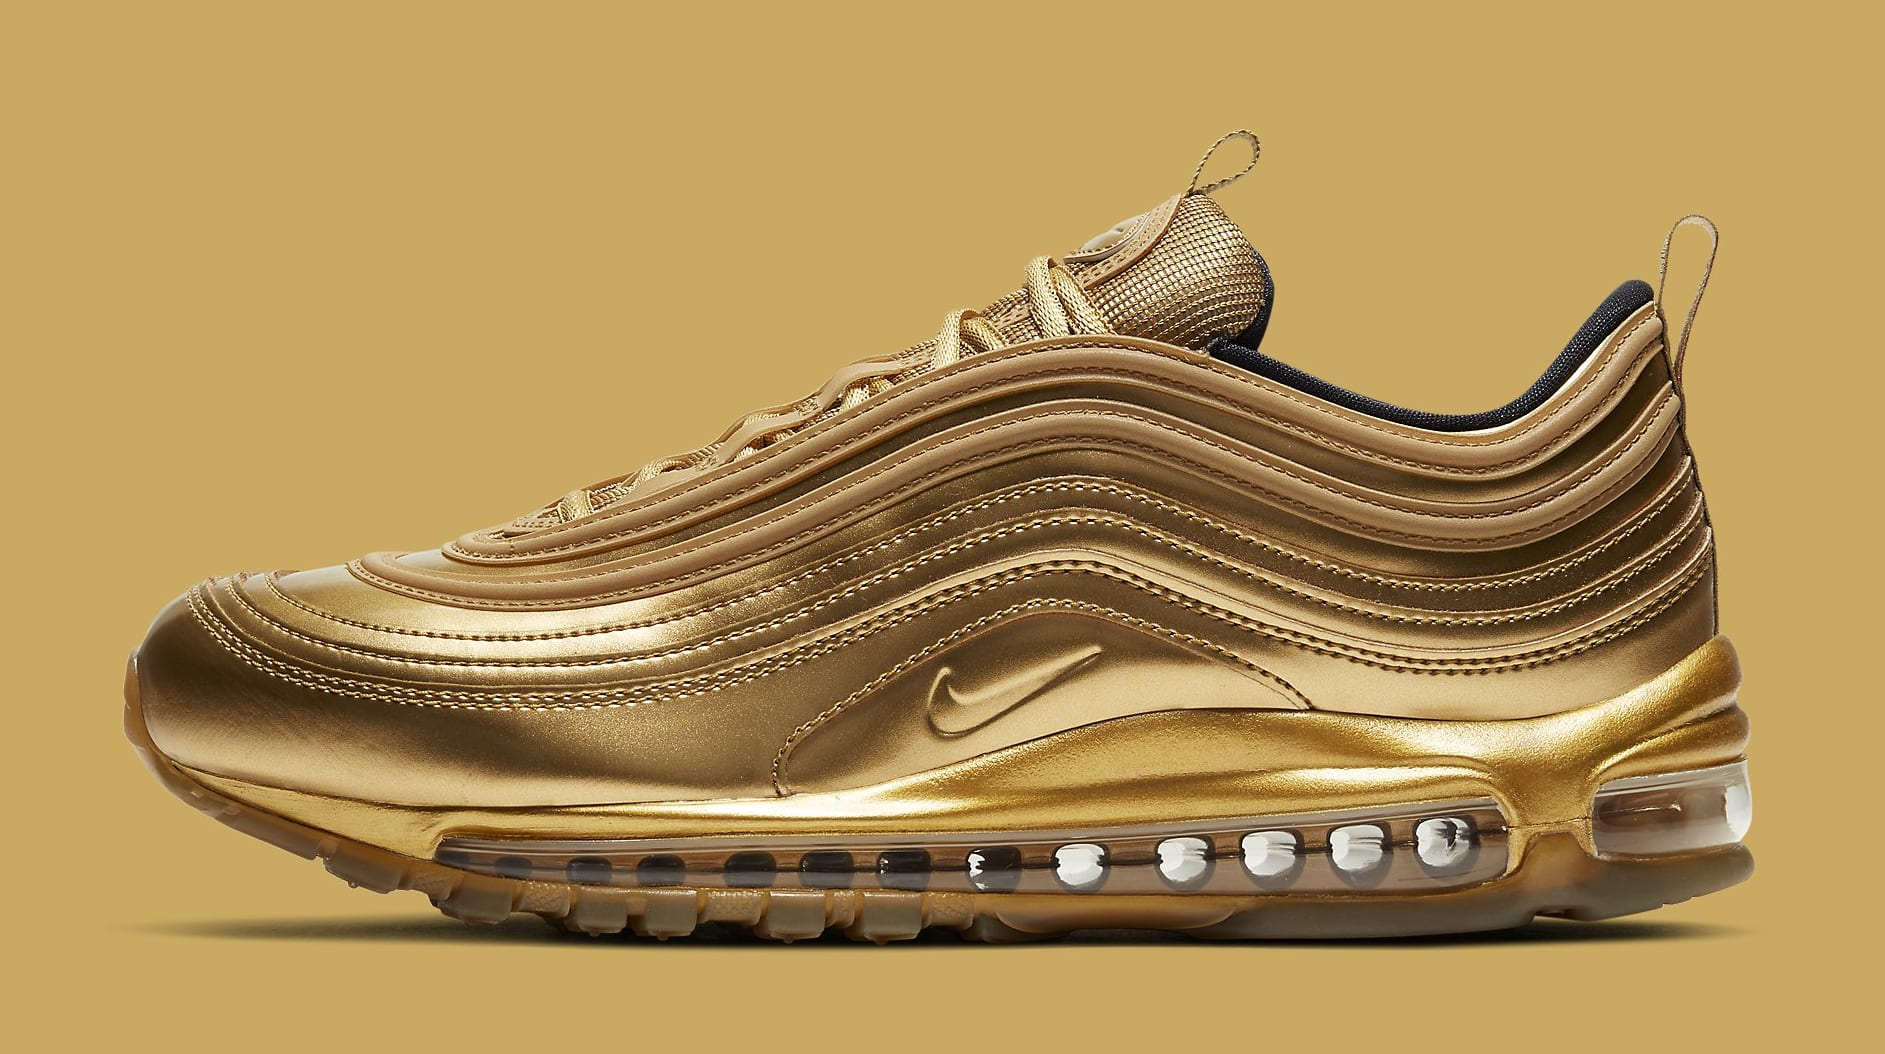 Nike Air Max 97 Gold Medal 2020 Olympics | First Look & Release Date